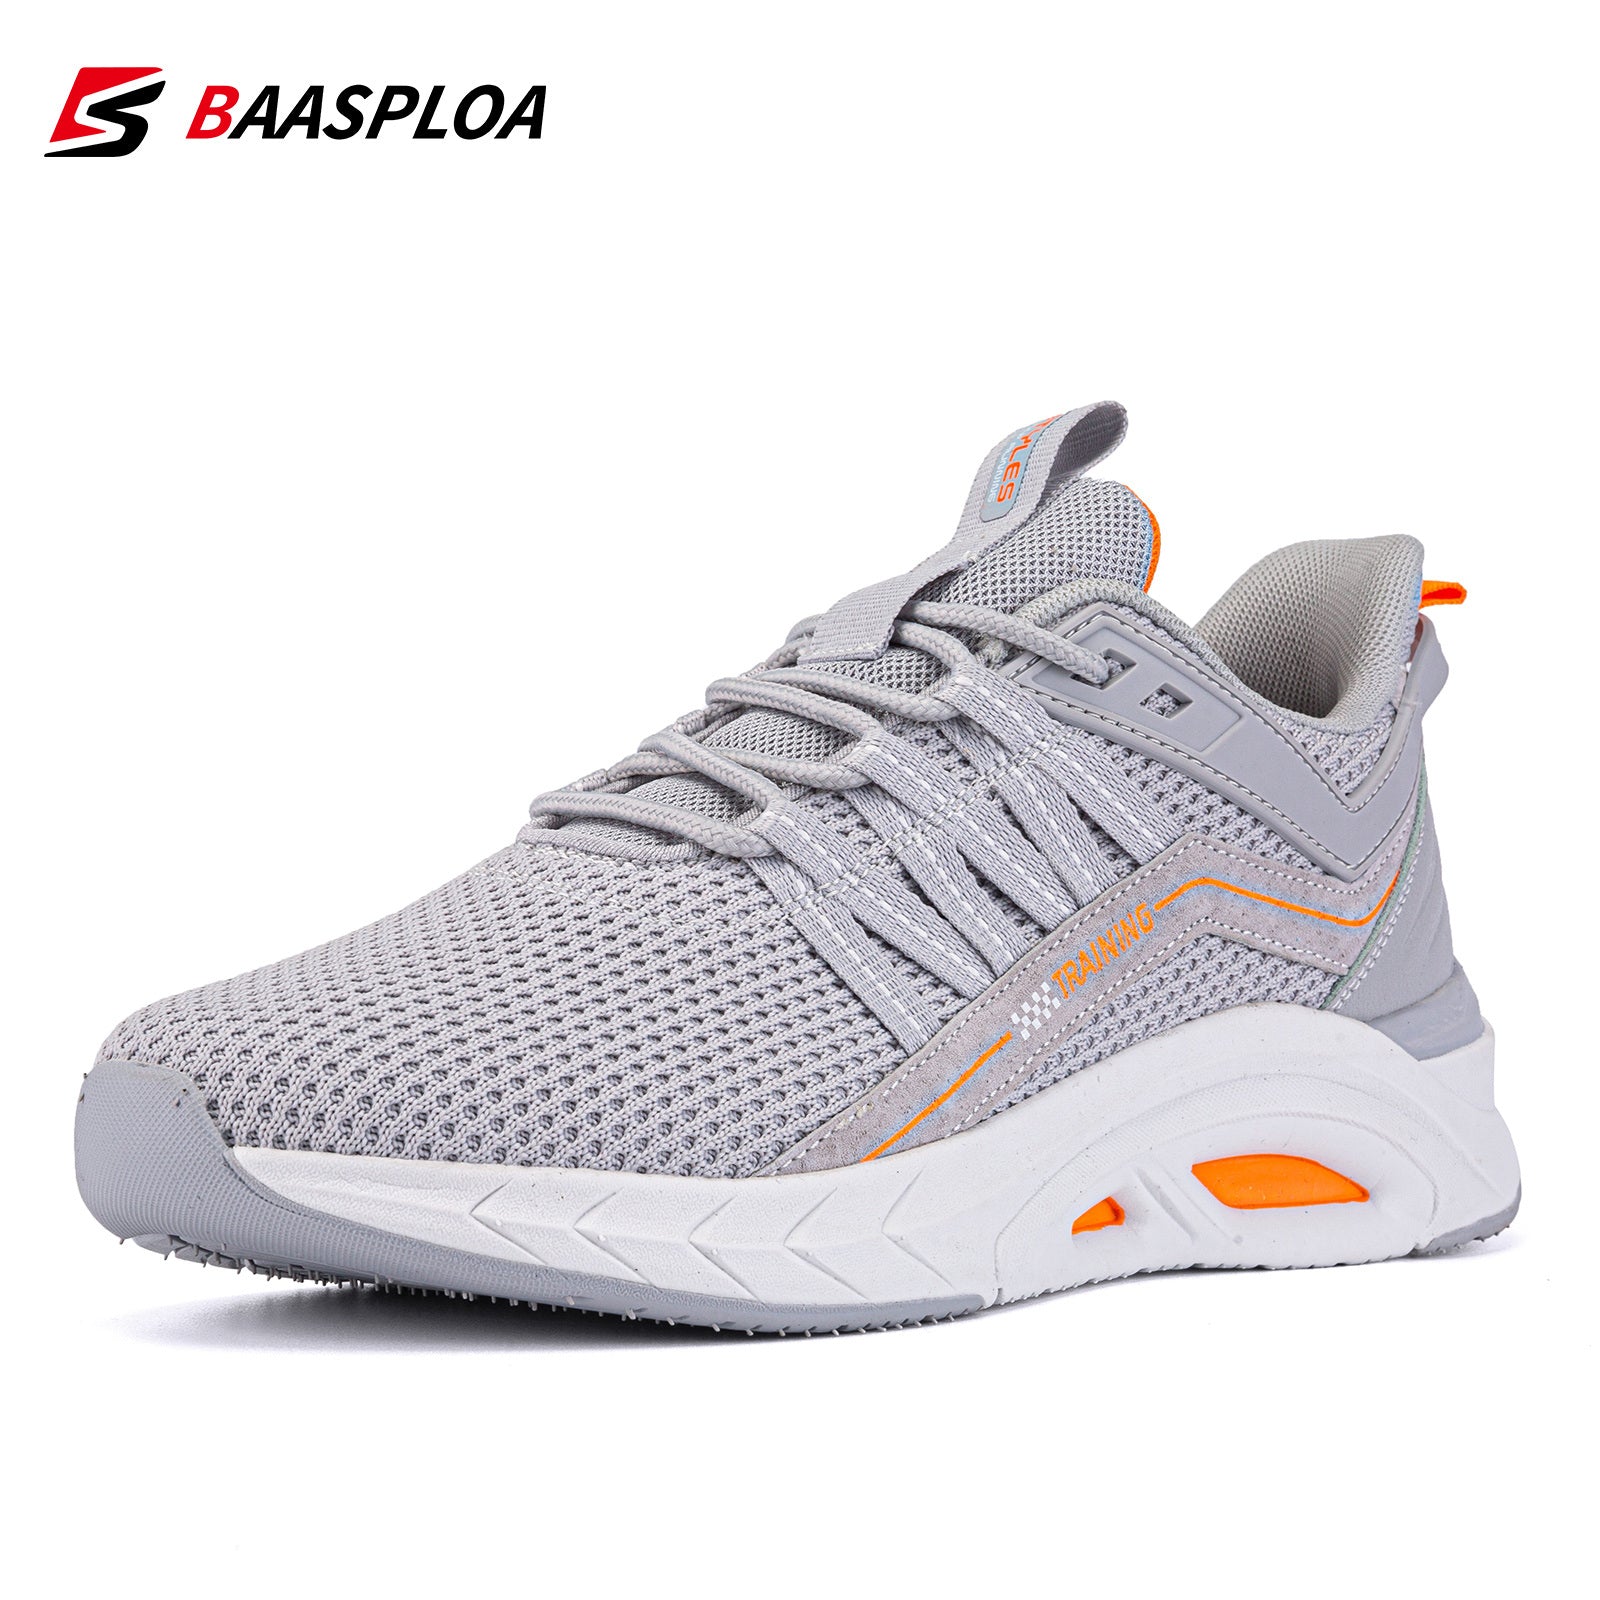 New Men's Sneaker Lightweight Knit Walking Shoes Comfortable Shoes Breathable Male Casual Sneakers